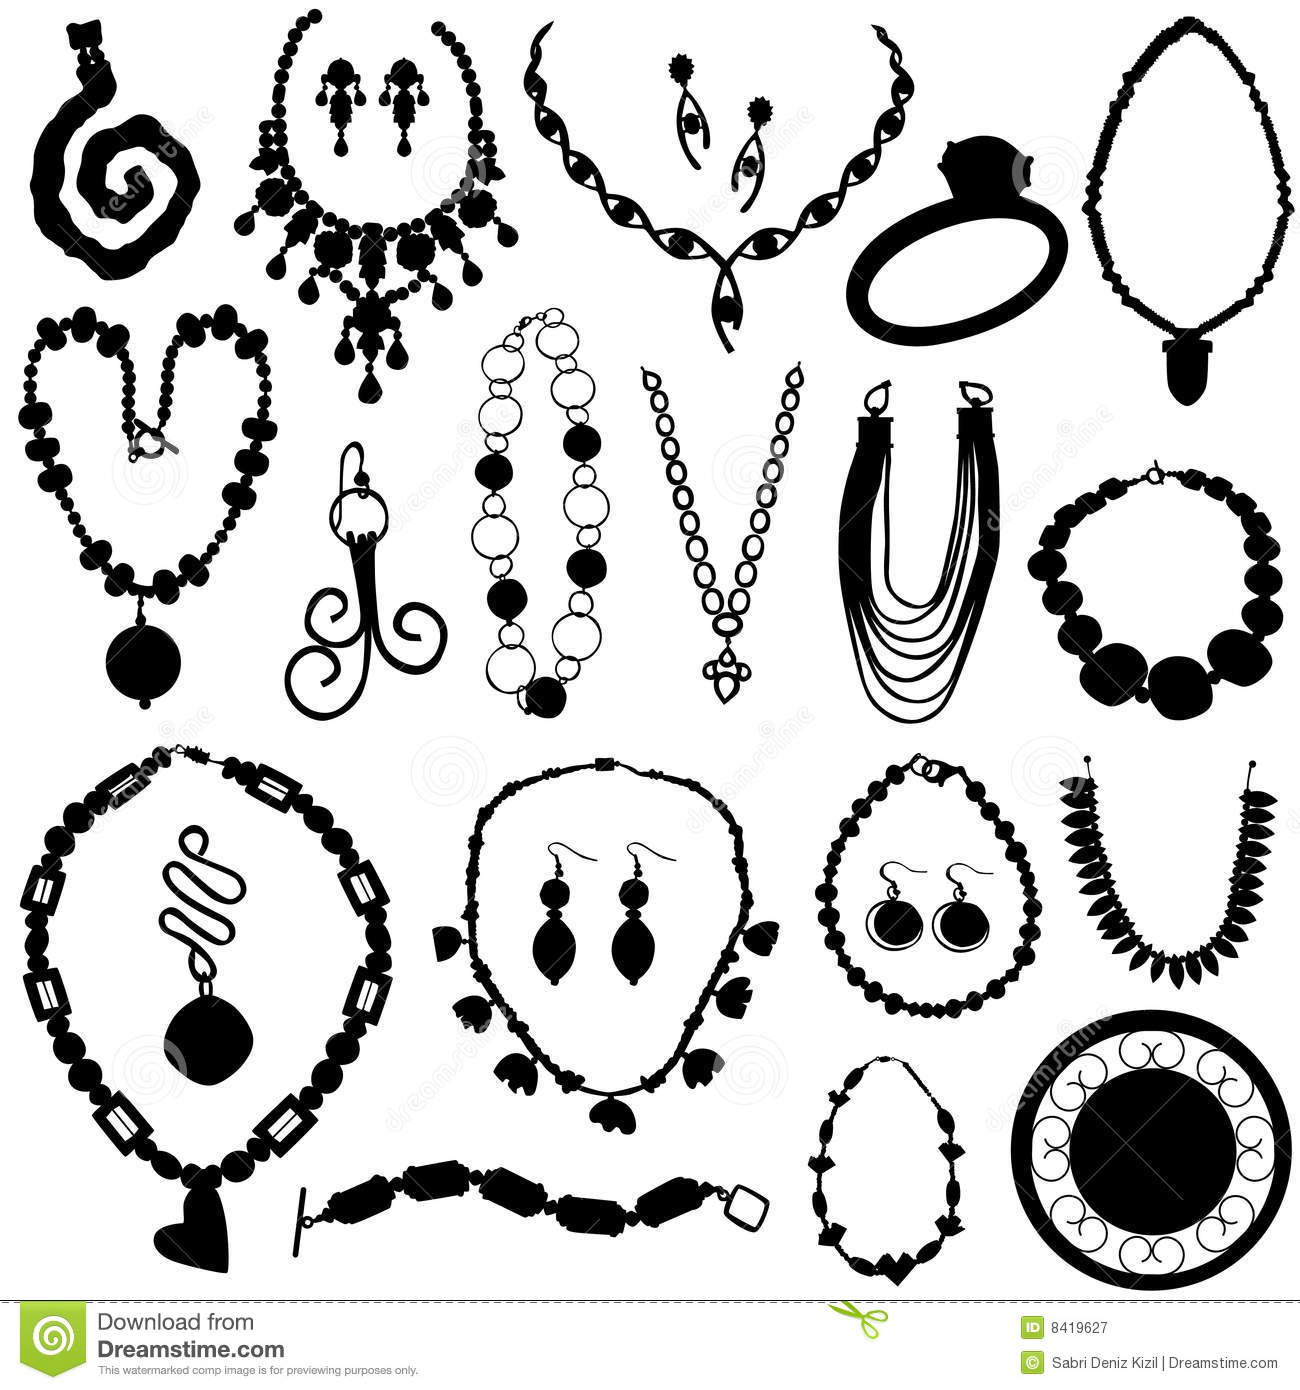 Jewelry set stock vector. Illustration of earring, fashion.